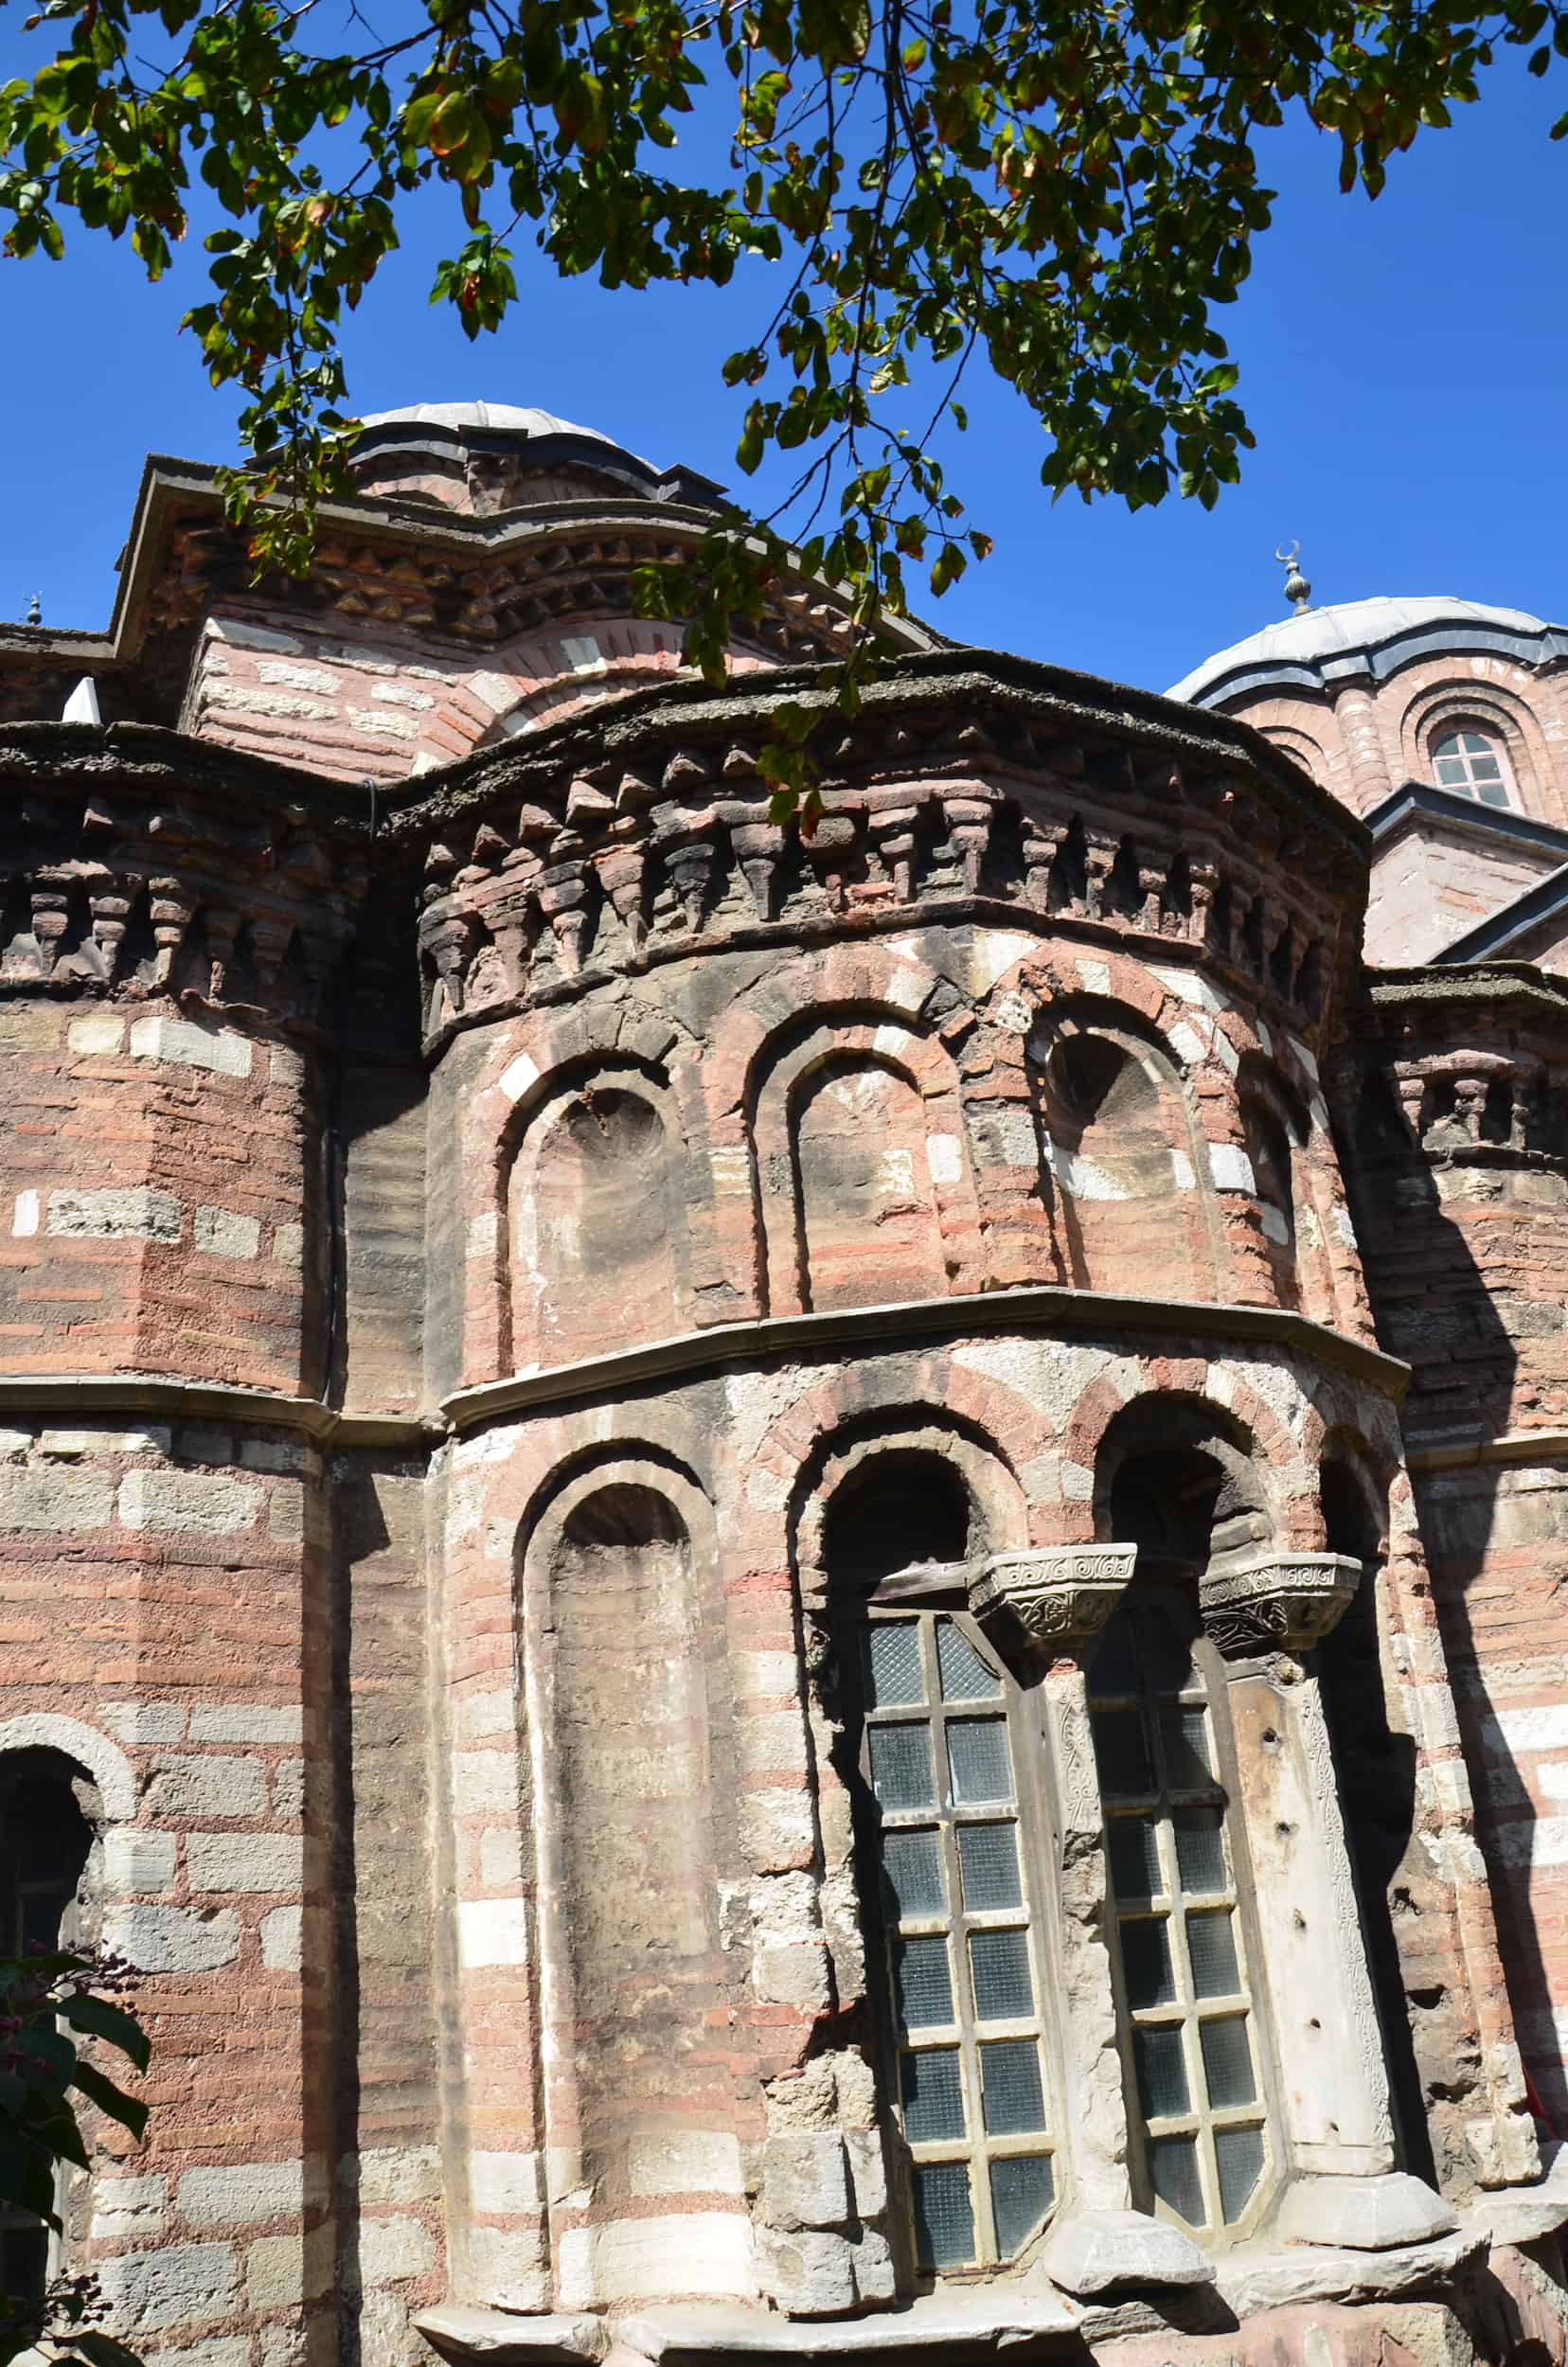 Apse of the parecclesion of the Pammakaristos Church in Istanbul, Turkey